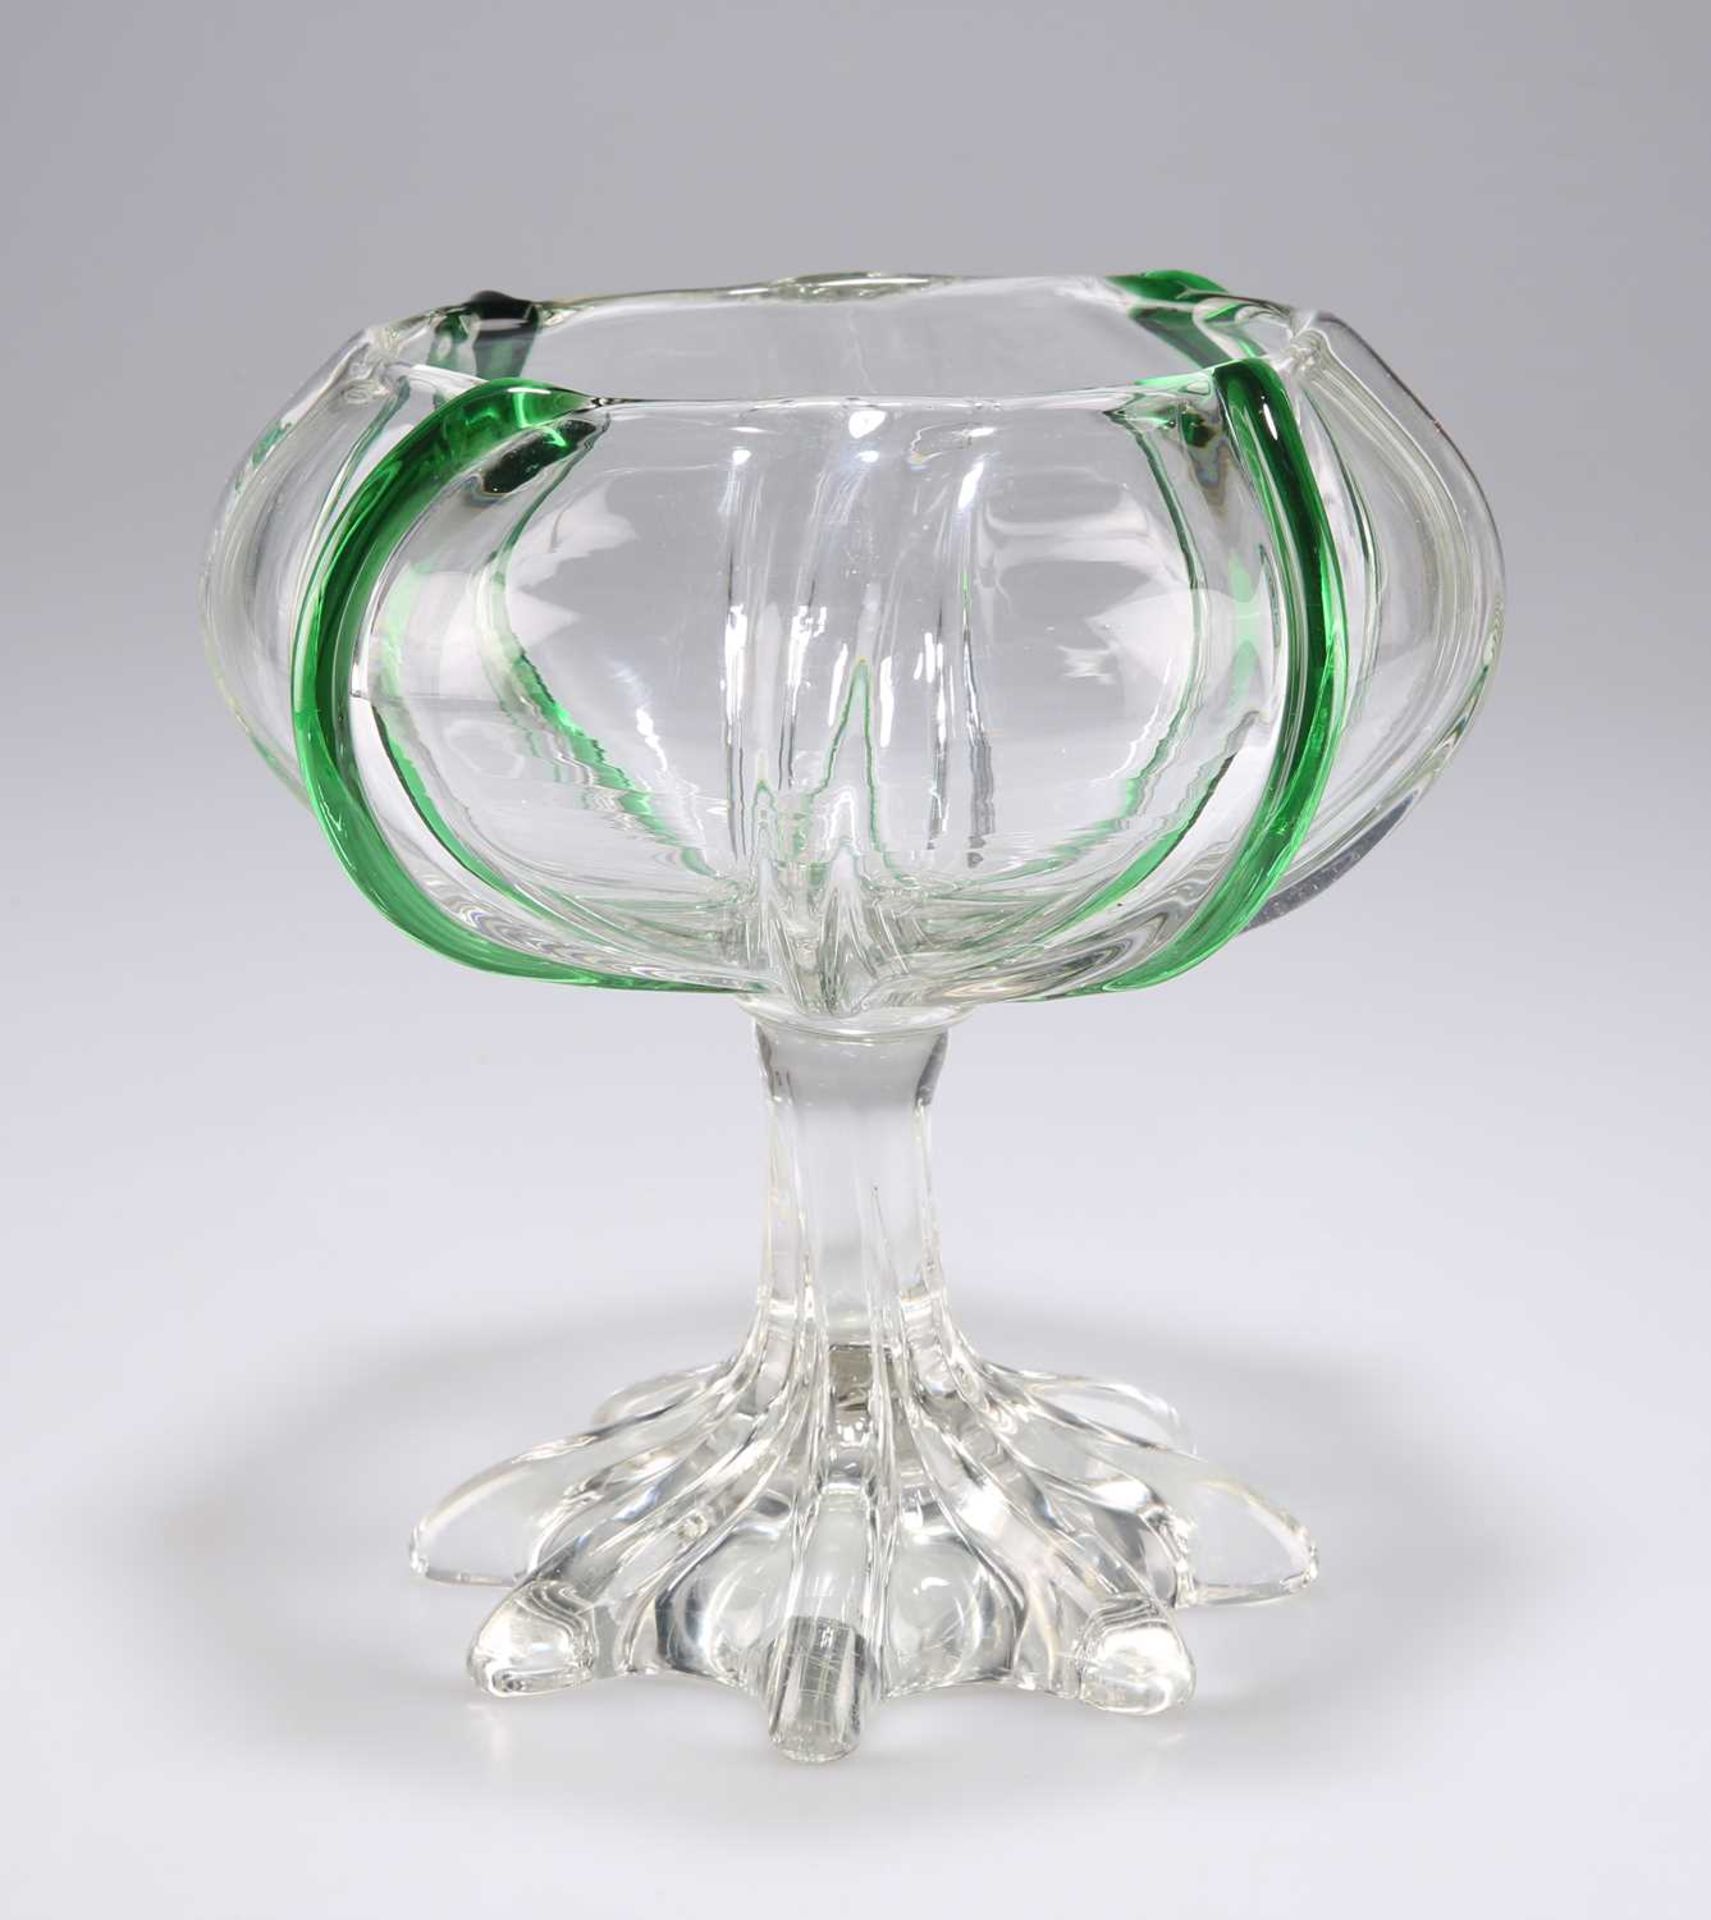 ATTRIBUTED TO JAMES POWELL, AN ART NOUVEAU GREEN-TRAILED GLASS BOWL - Image 2 of 2